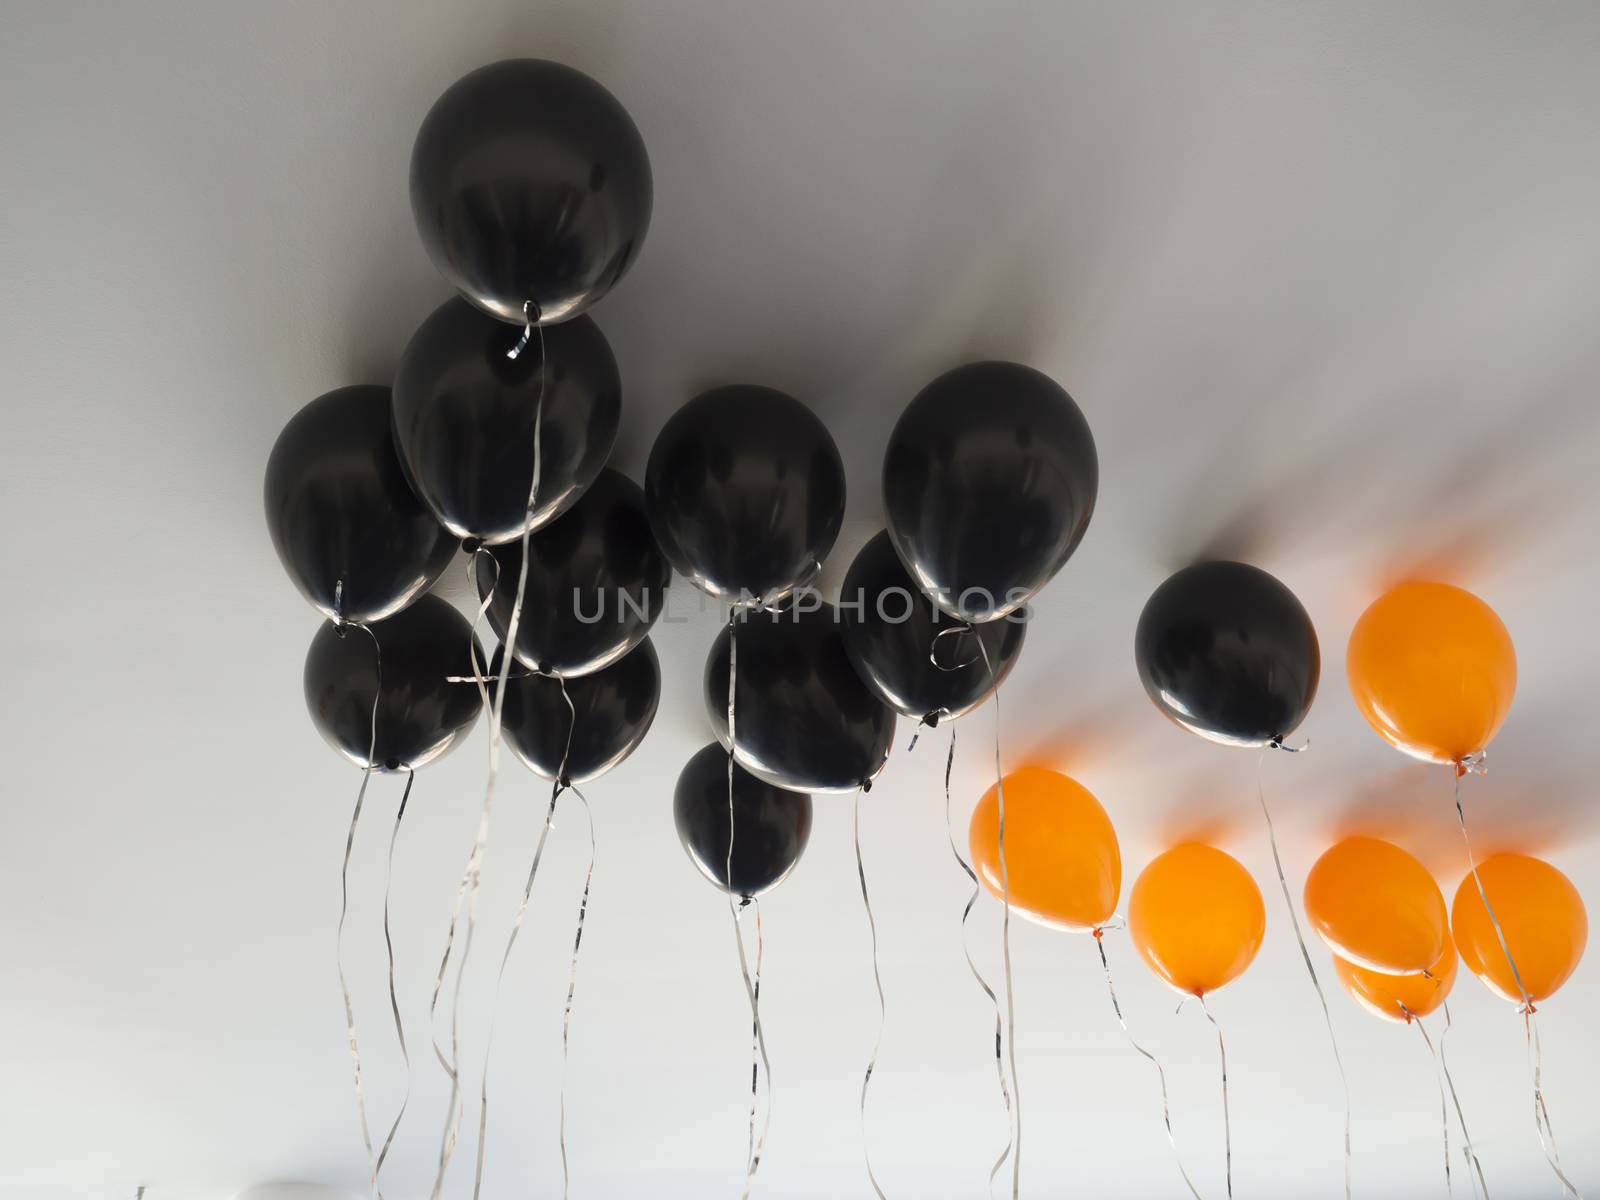 bunch of orange and black air balloons for halloween or birthday over white ceiling background. Holidays, decoration and party concept.